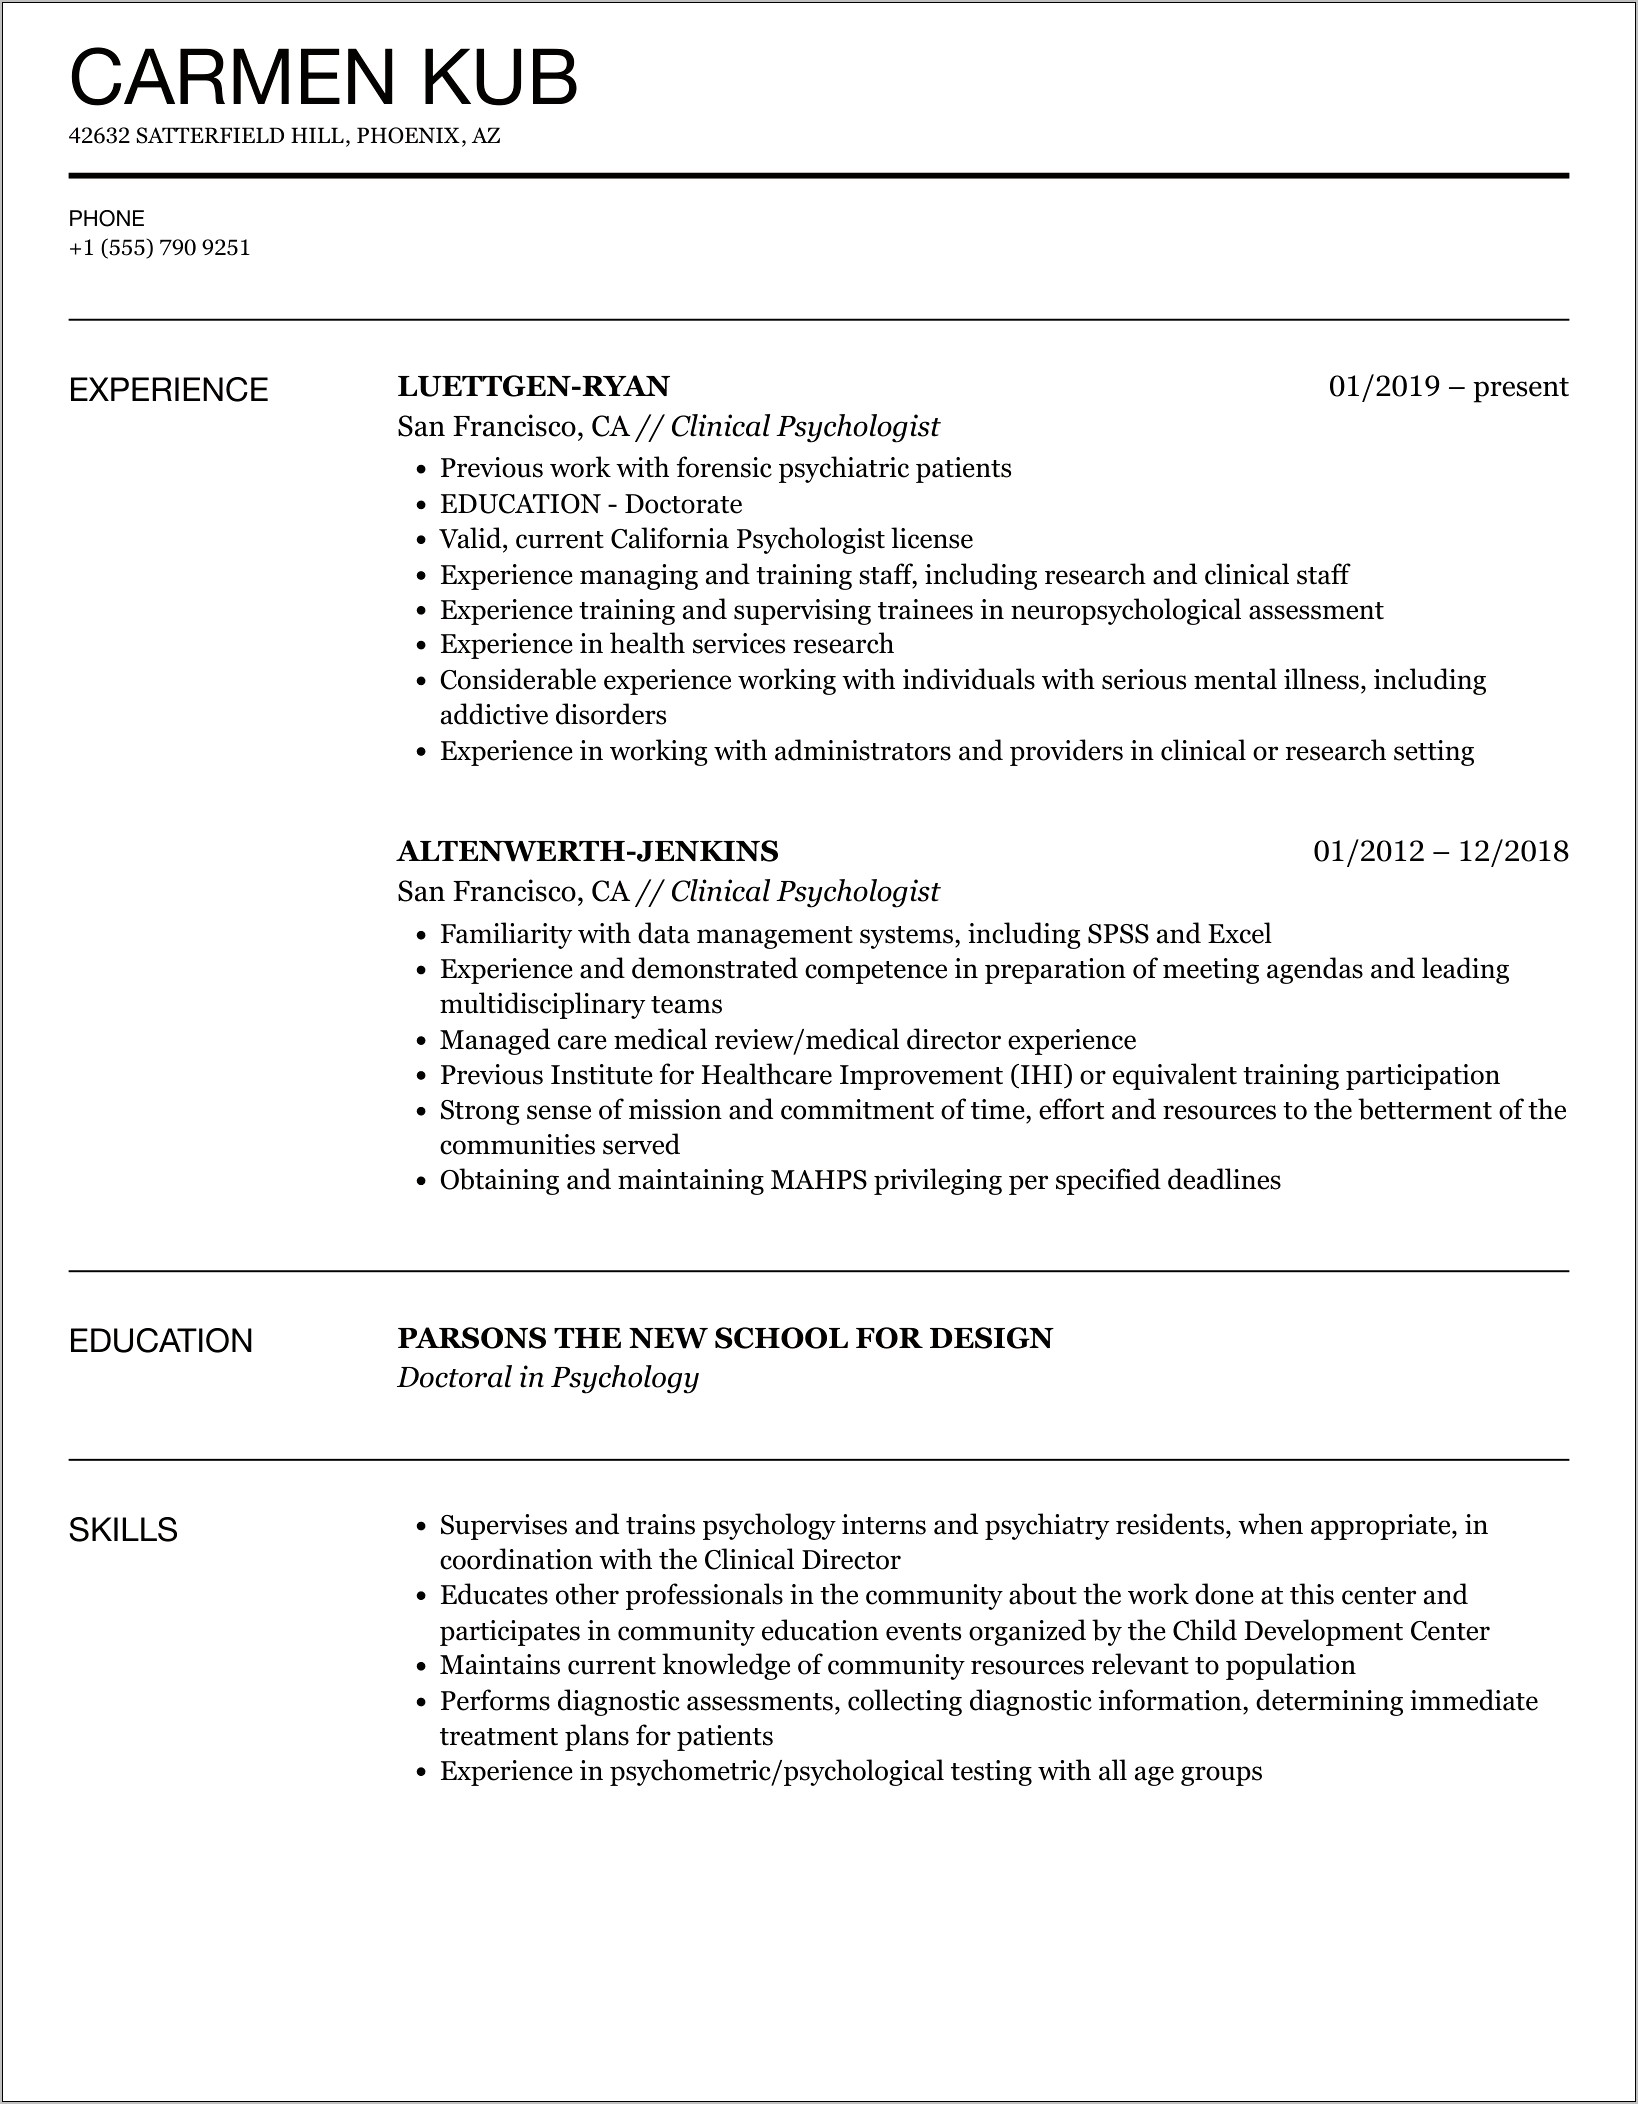 Sample Resume For Supervision Counselor